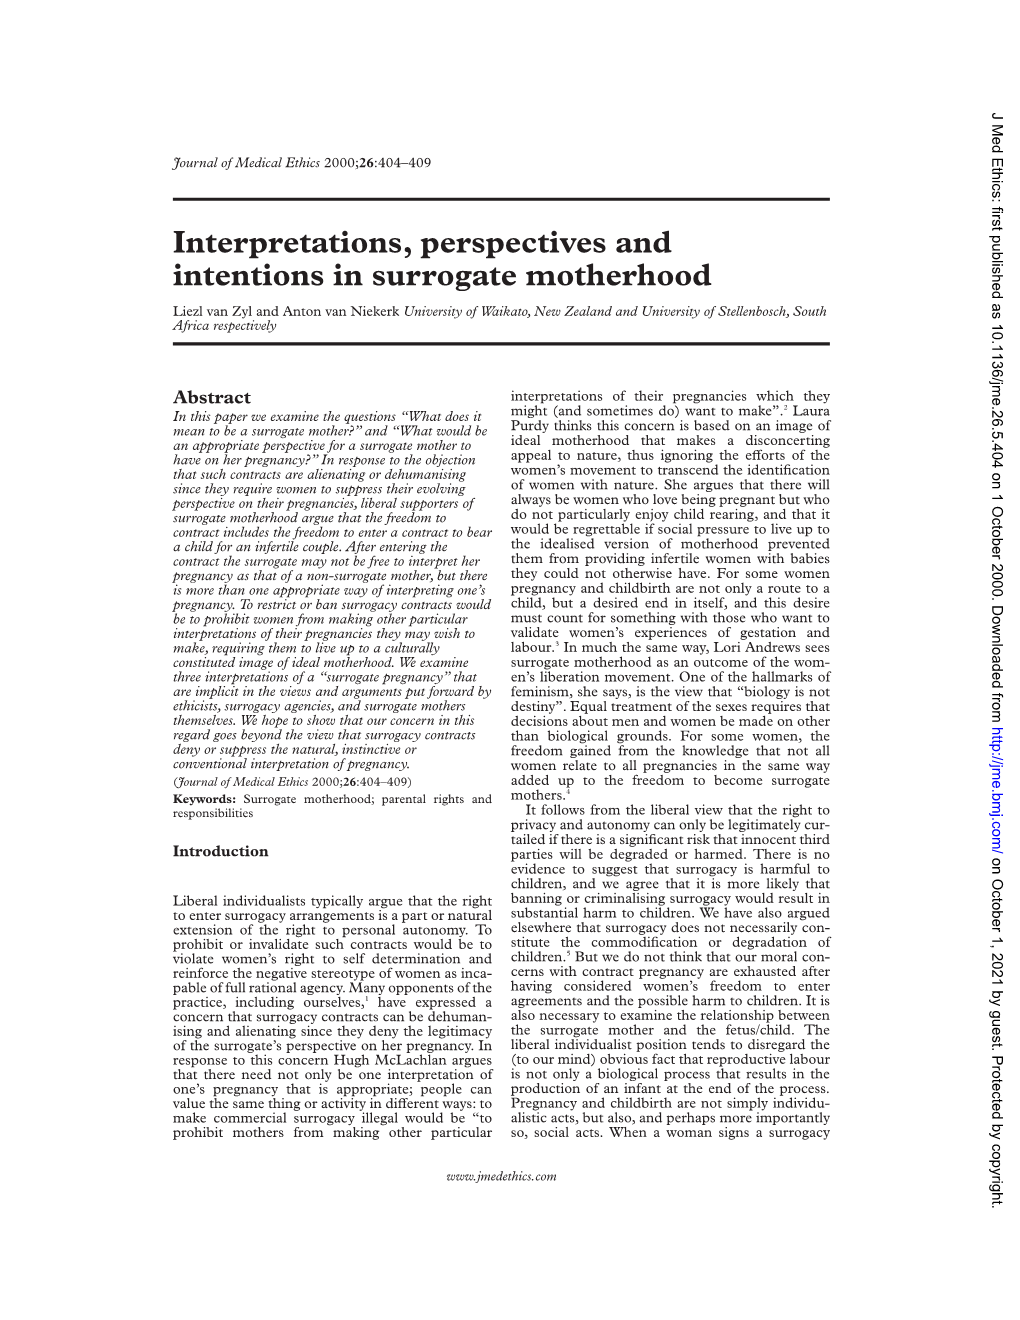 Interpretations, Perspectives and Intentions in Surrogate Motherhood